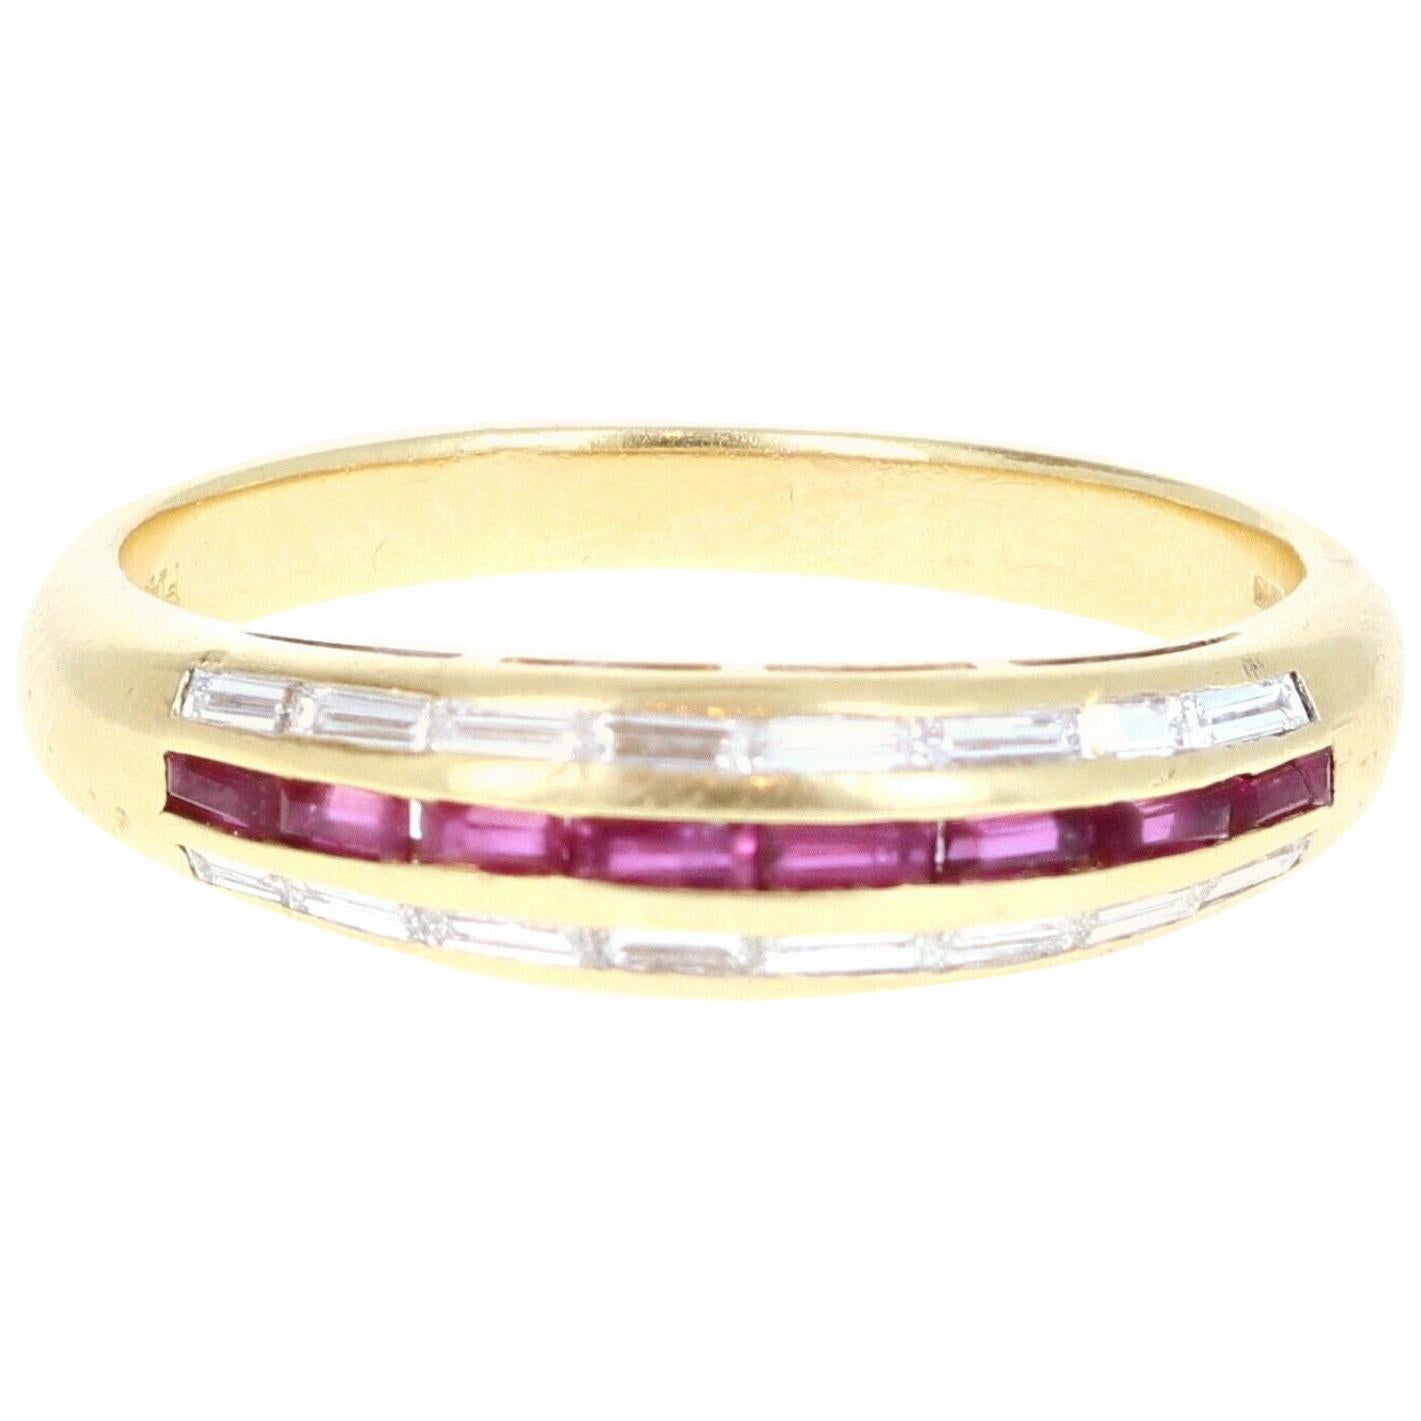 Piaget 18 Karat Yellow Gold, Diamond and Ruby Band Ring 0.50 Carat For Sale